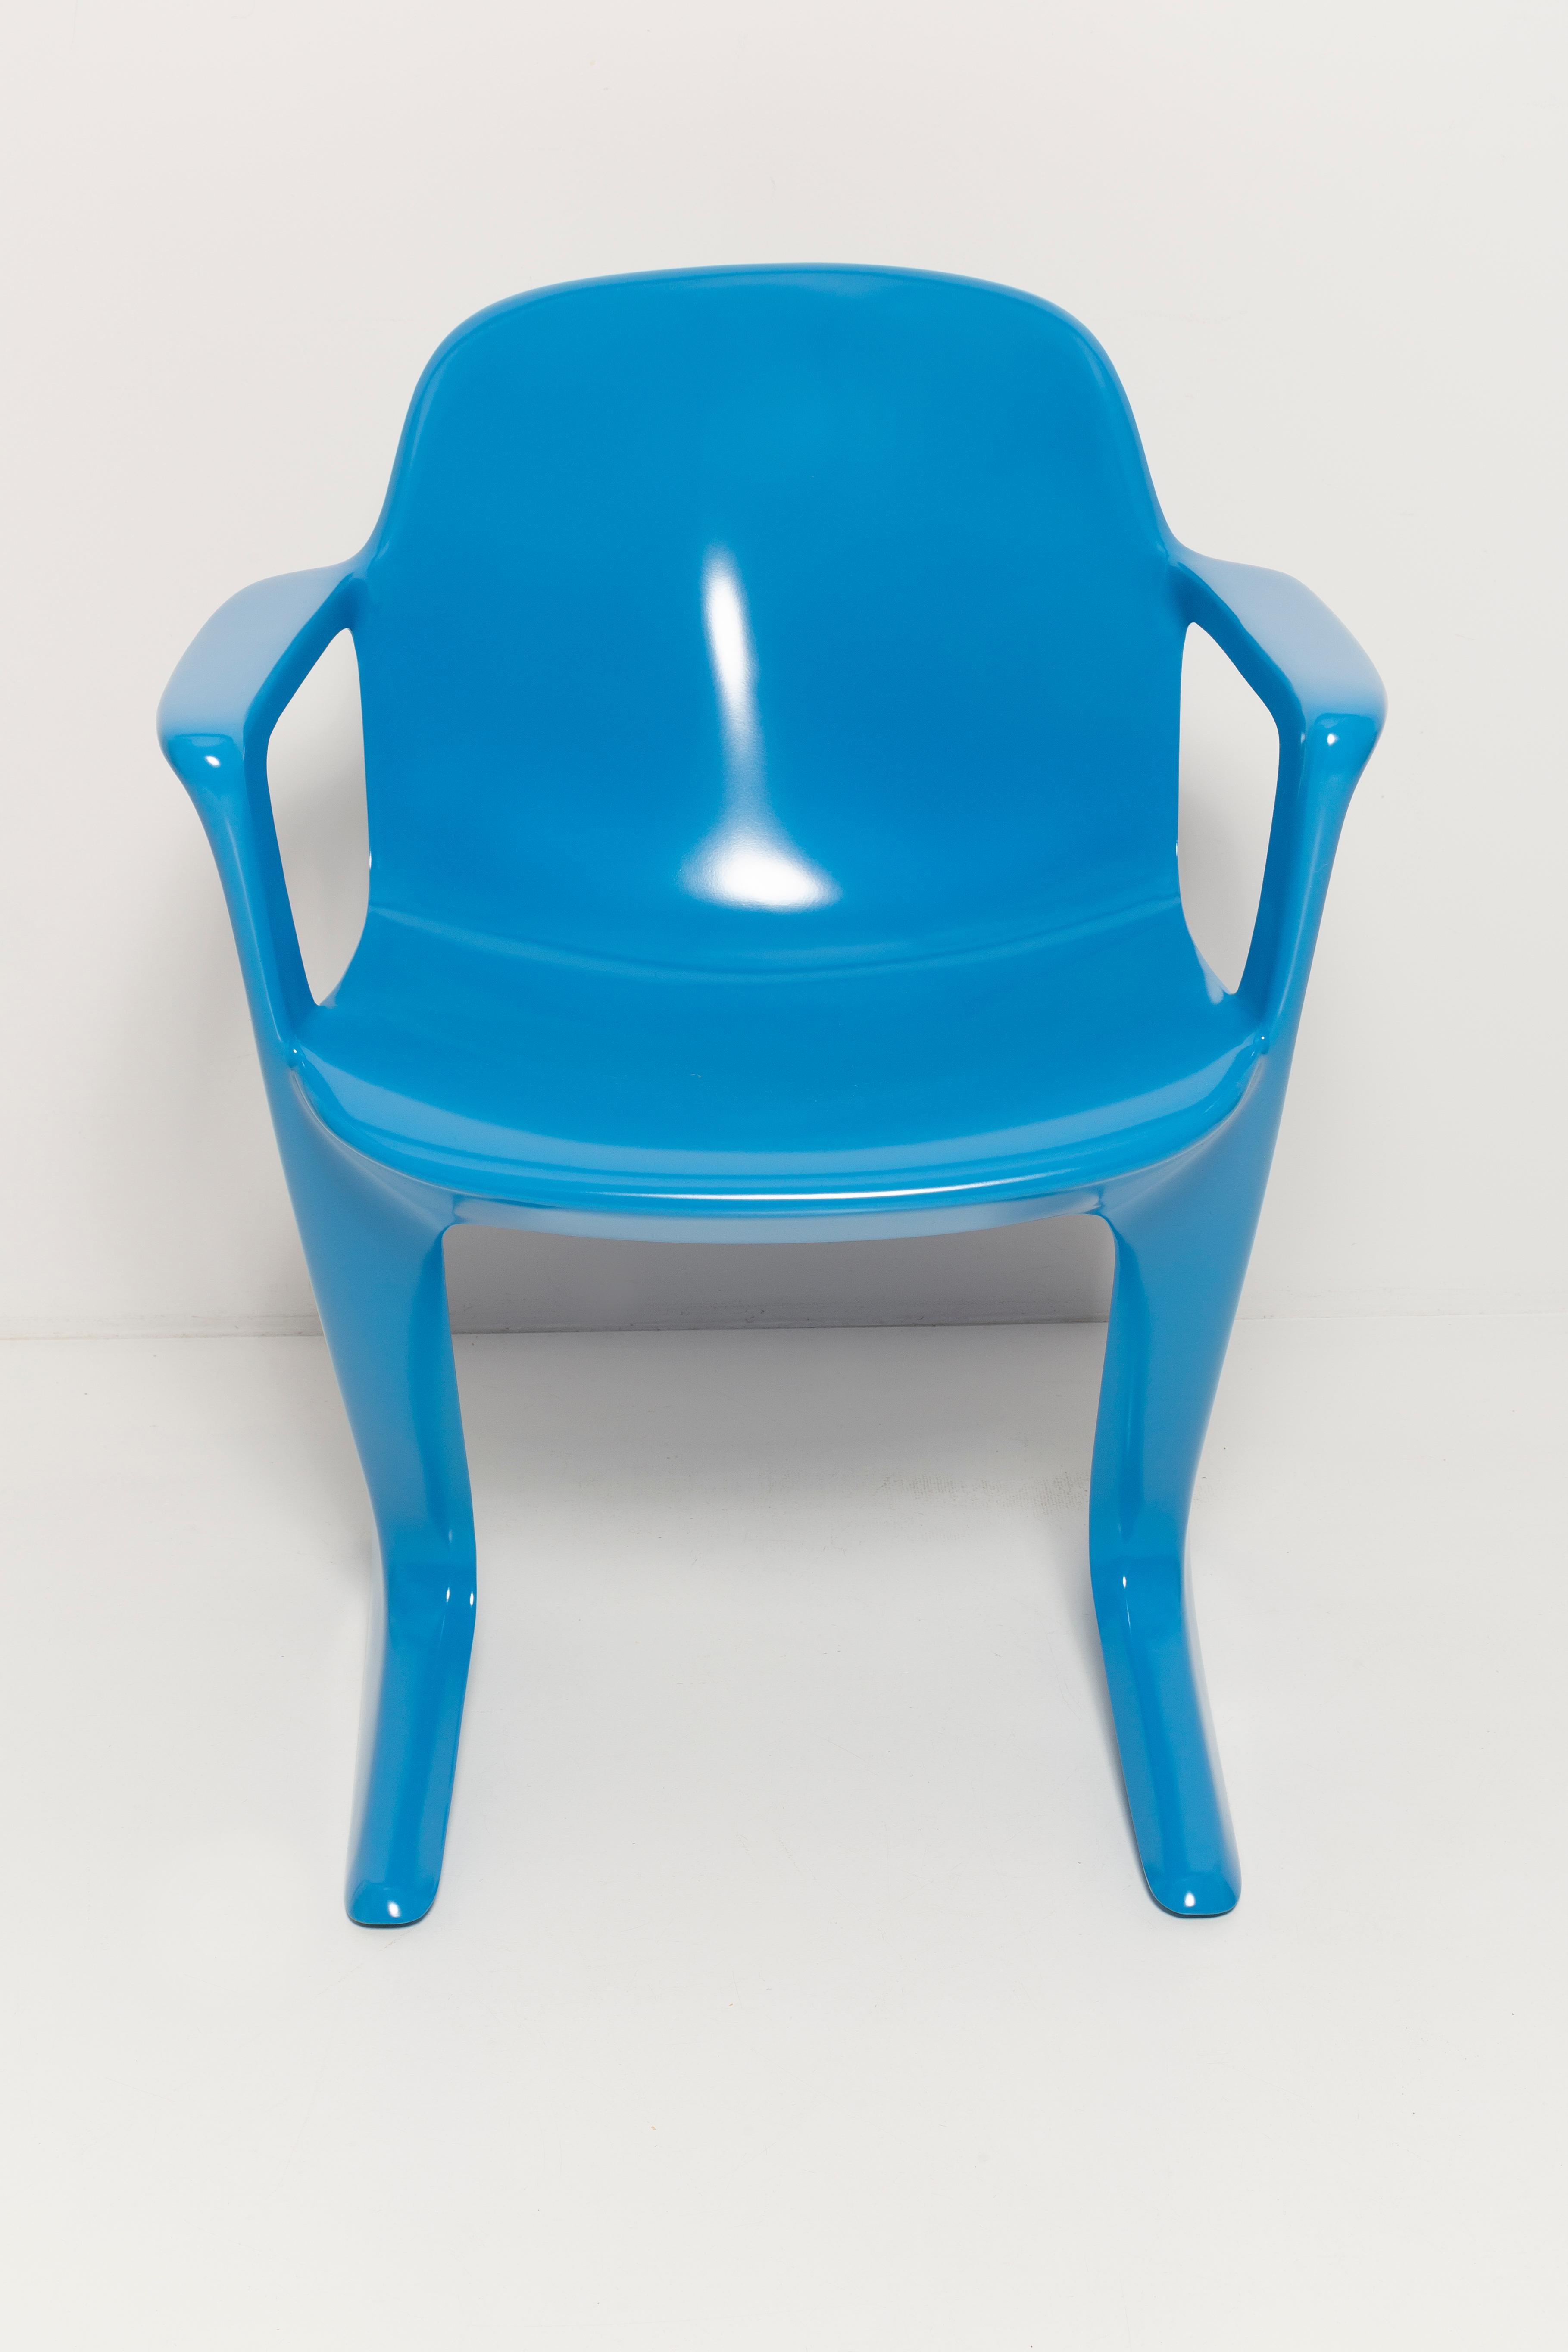 20th Century Blue Kangaroo Chair Designed by Ernst Moeckl, Germany, 1968 For Sale